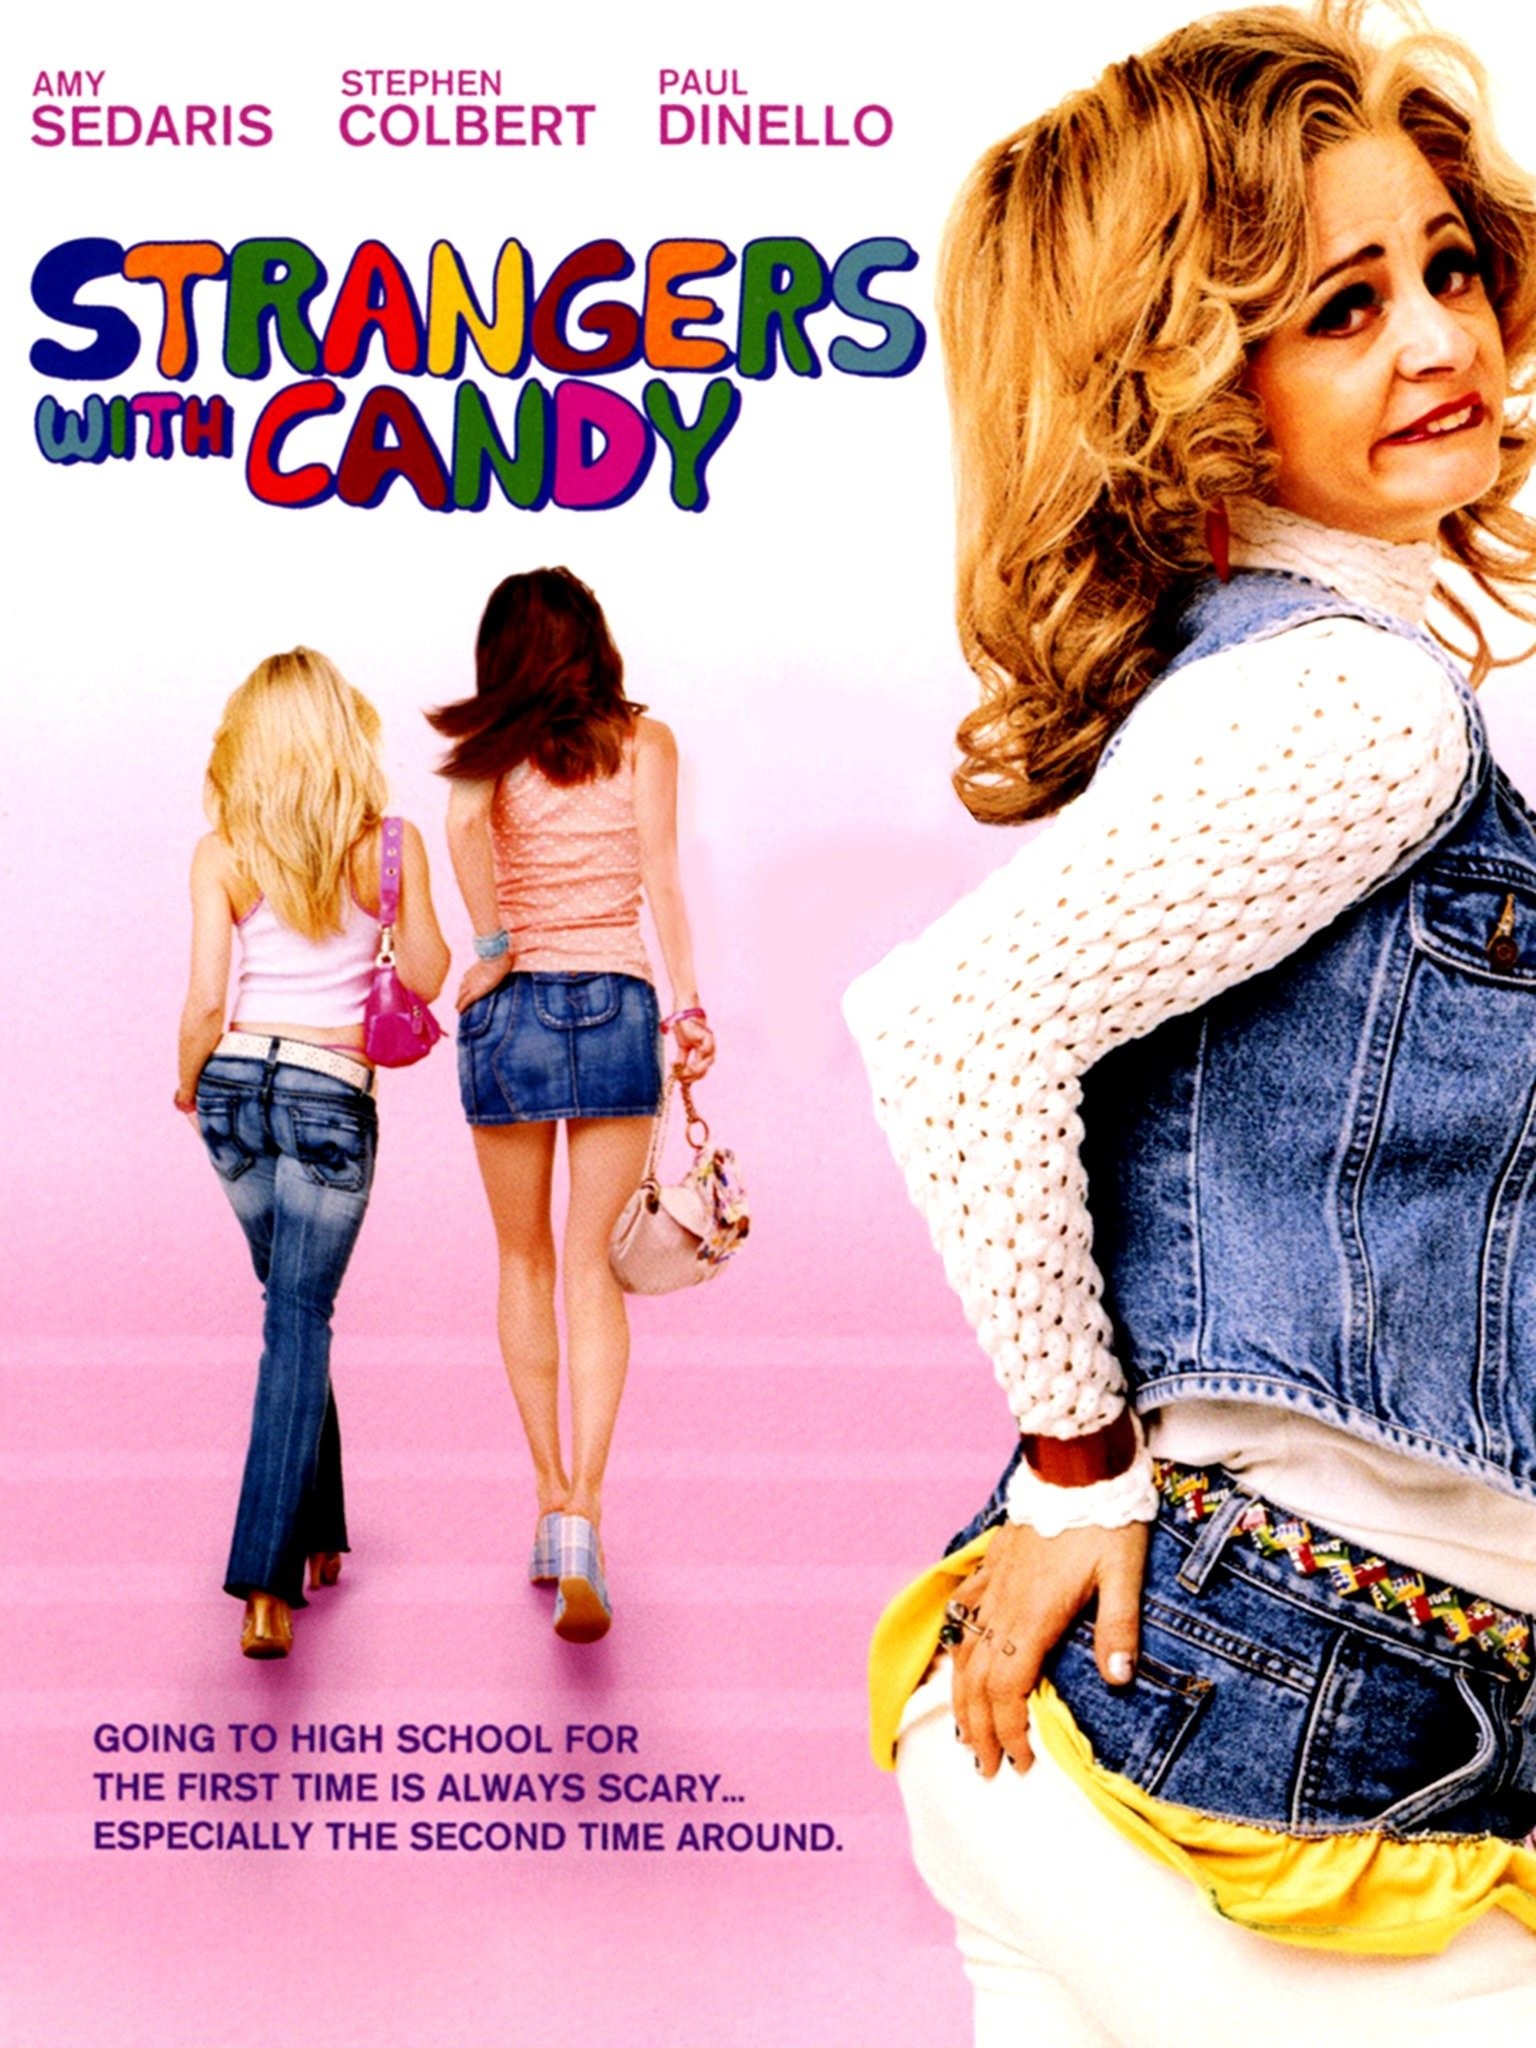 Strangers with Candy  Funny shows, Amy sedaris, Stranger